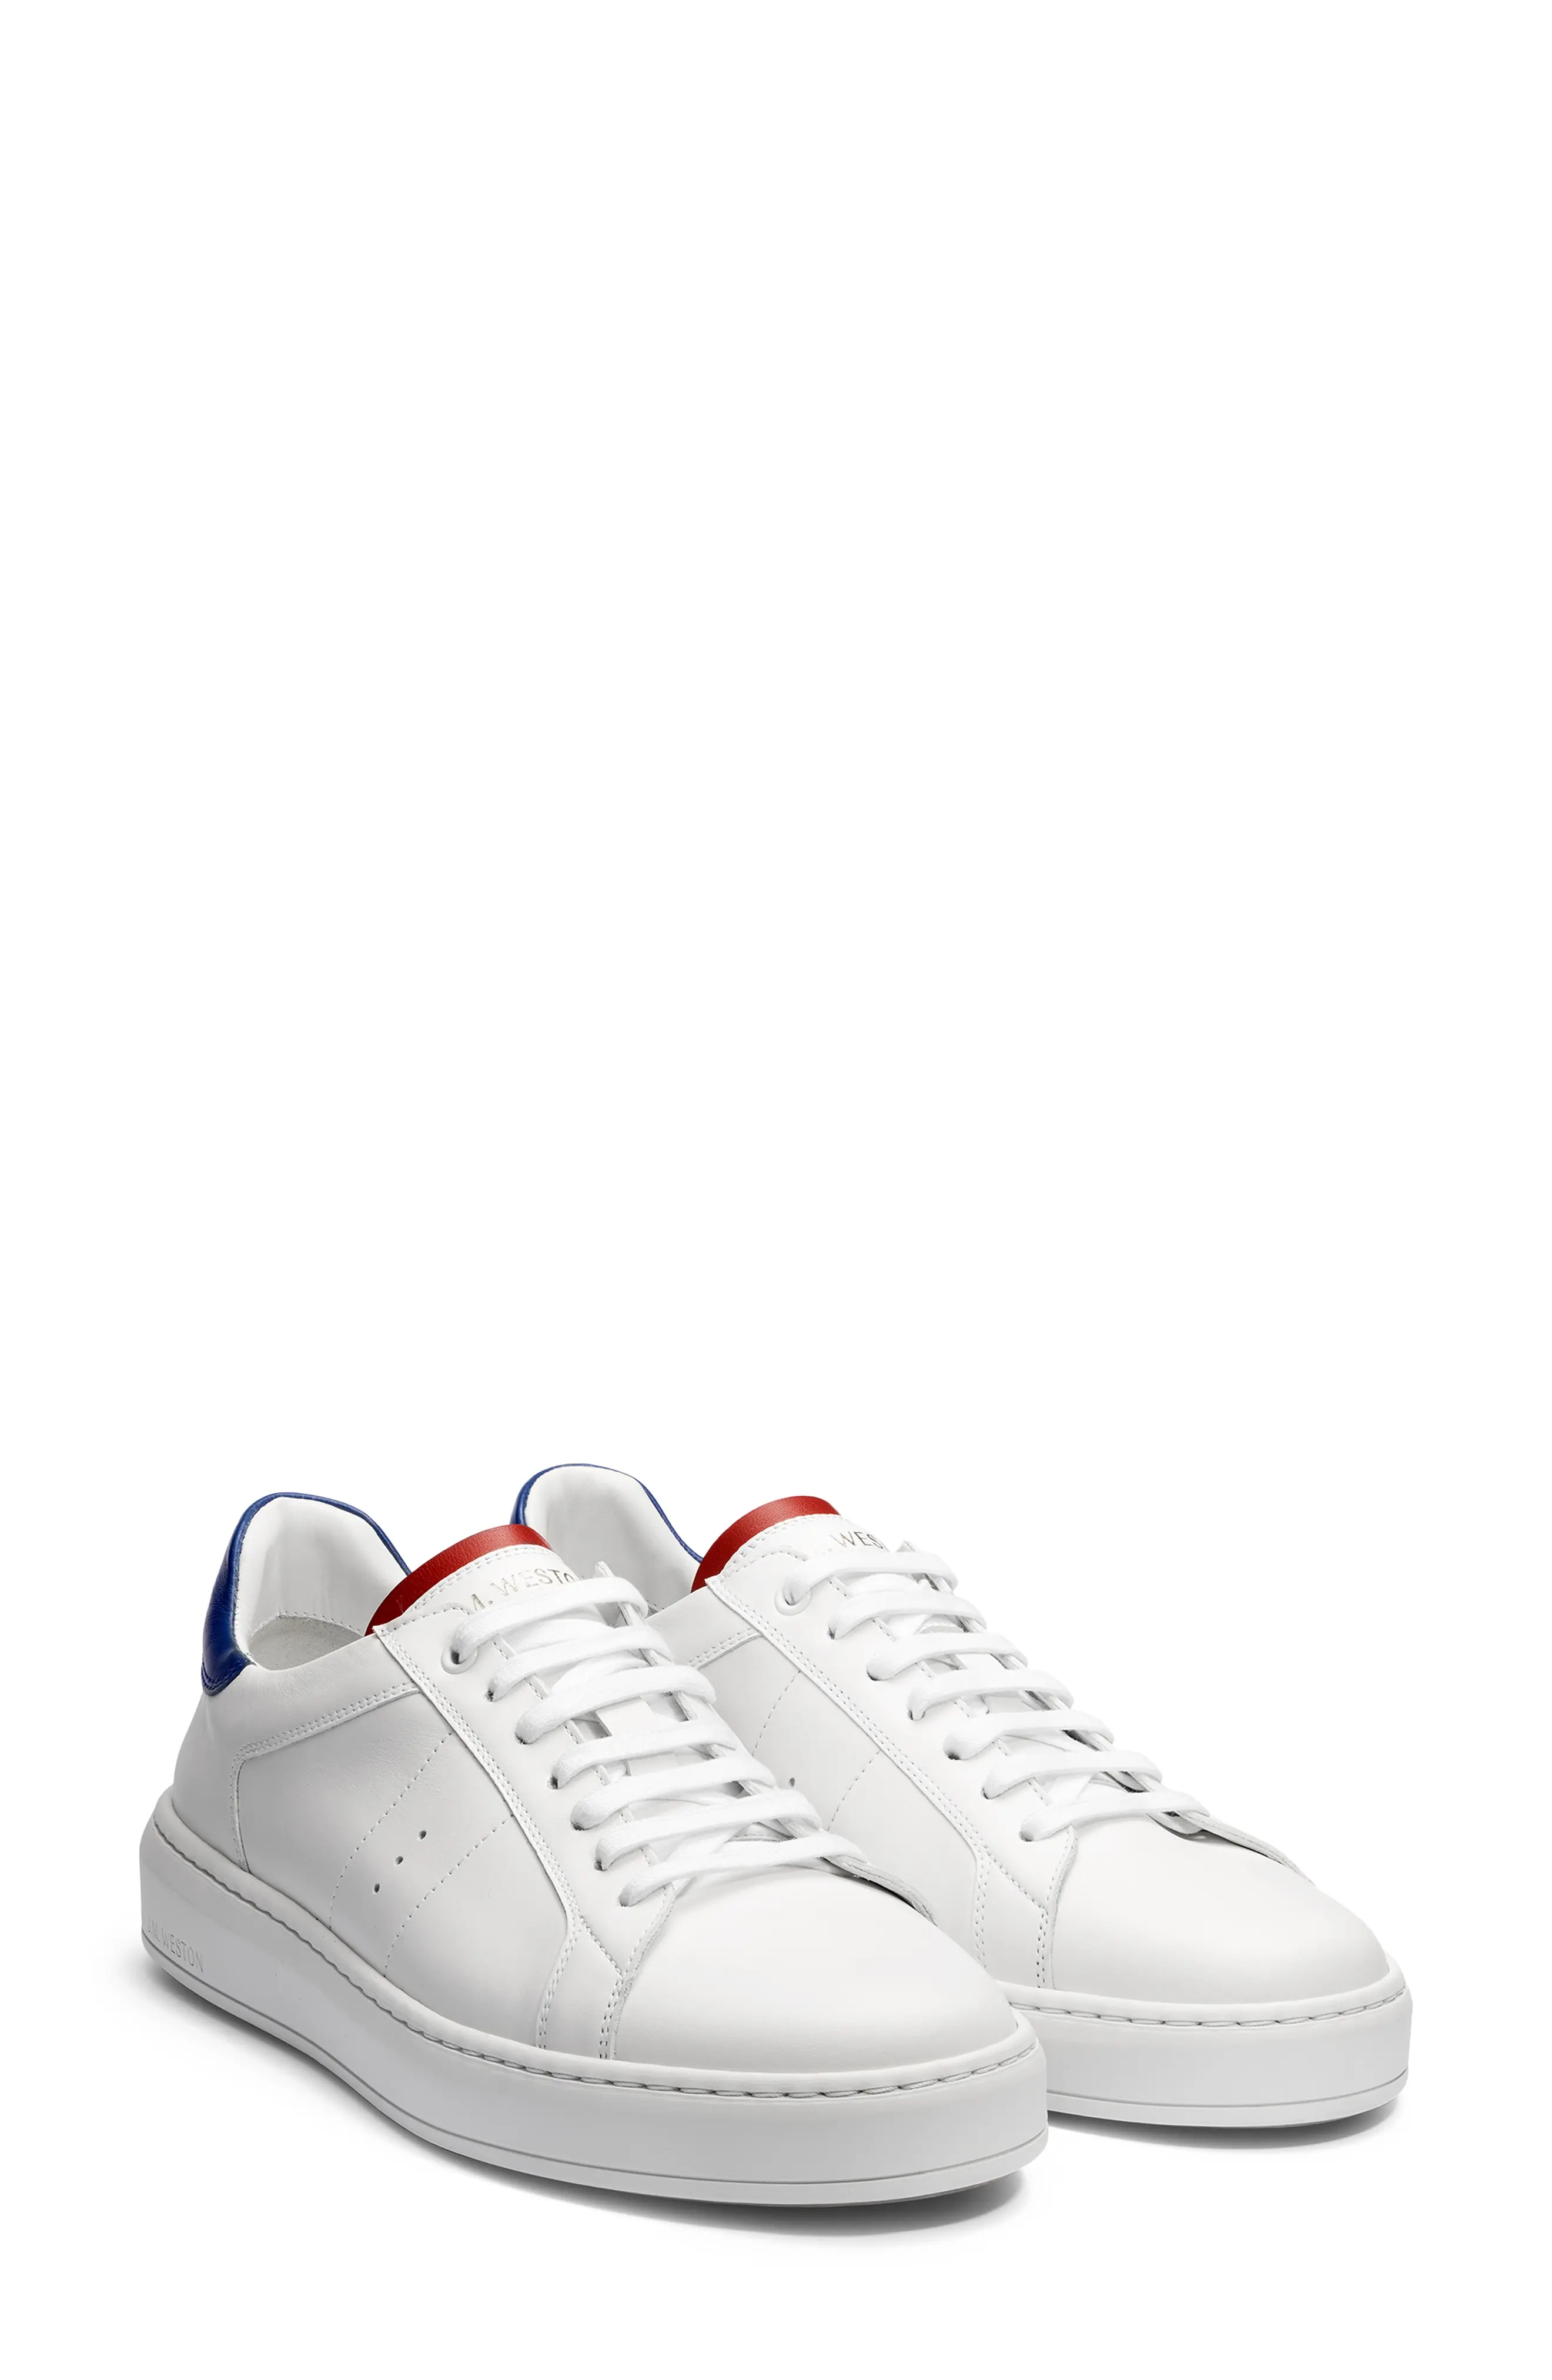 On Time Sneaker in Whte /Red /Blue - 1